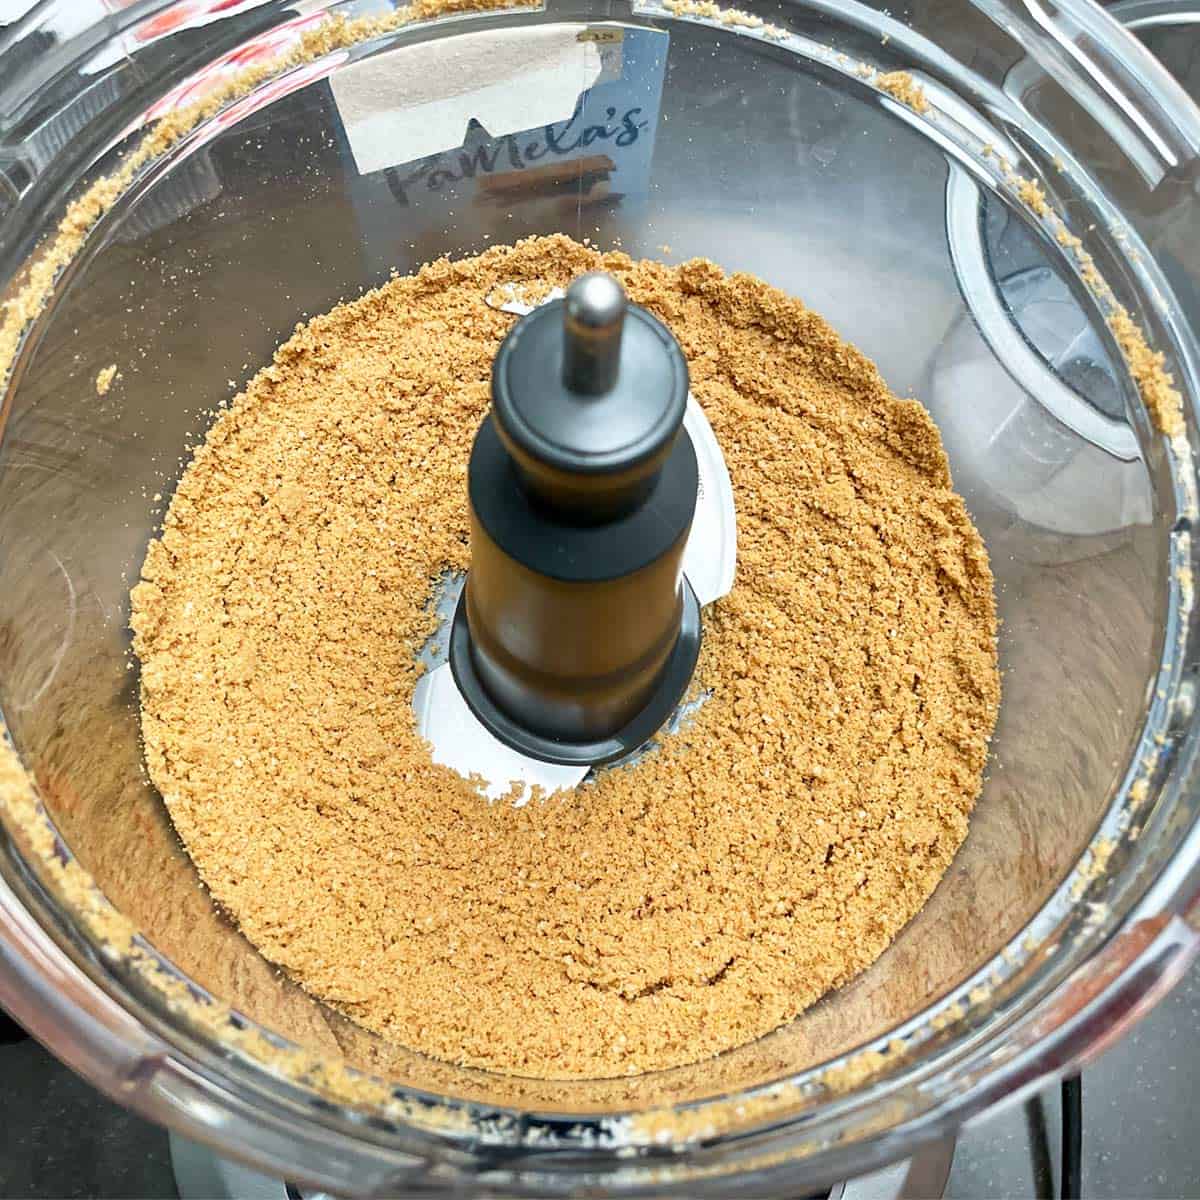 Finely pulsed almonds and graham cracker in a food processer.